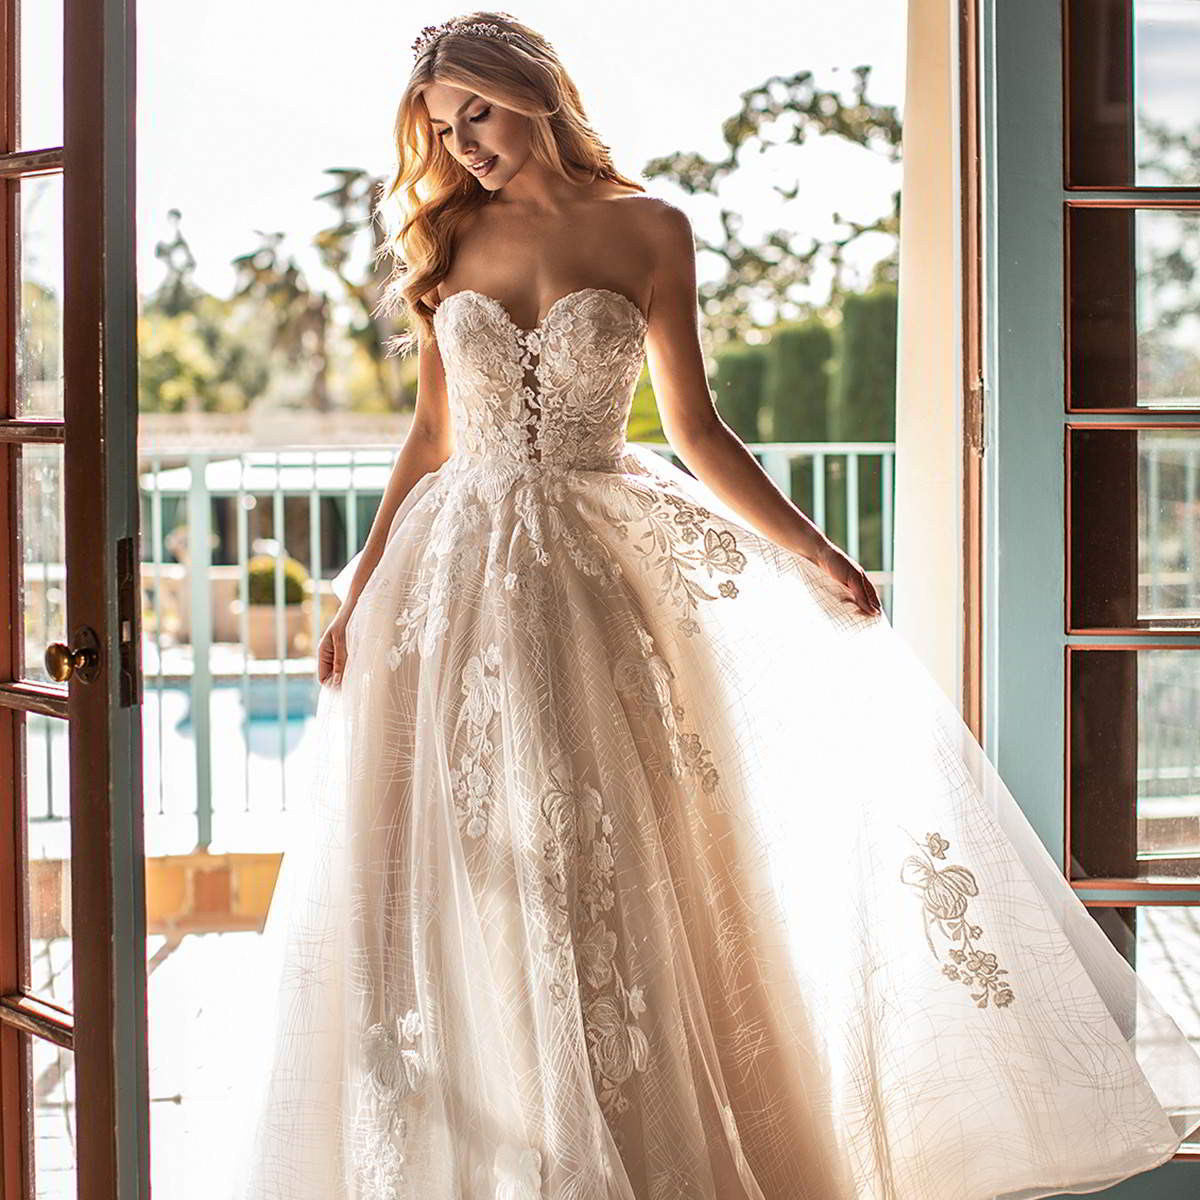 moonlight collection fall 2020 bridal collection featured on wedding inspirasi thumbnail